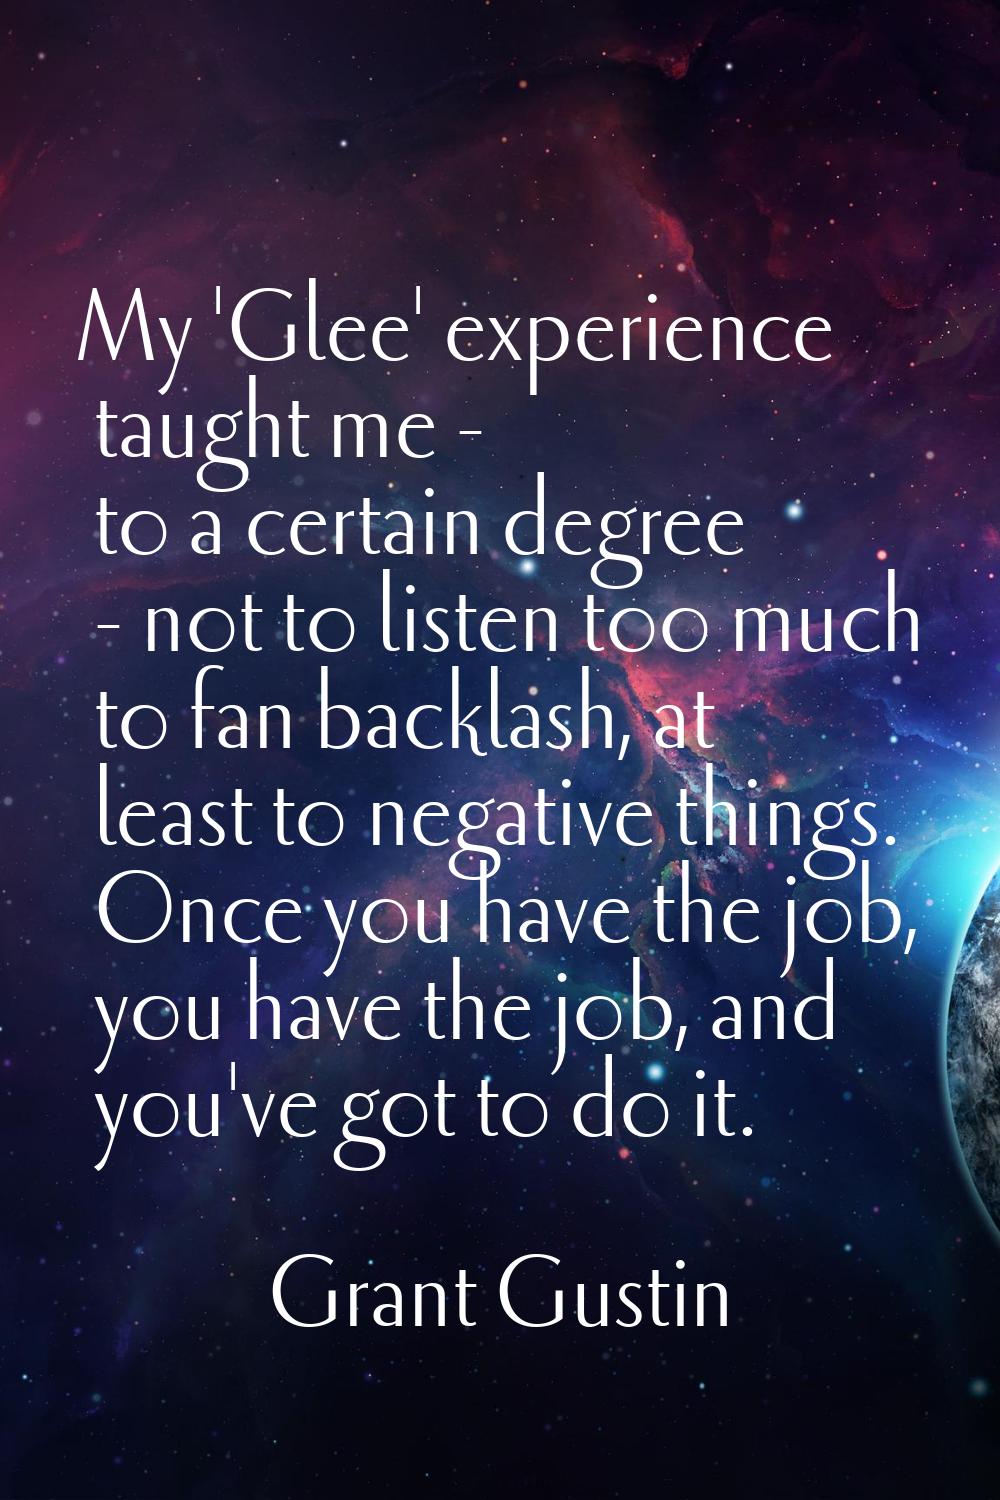 My 'Glee' experience taught me - to a certain degree - not to listen too much to fan backlash, at l